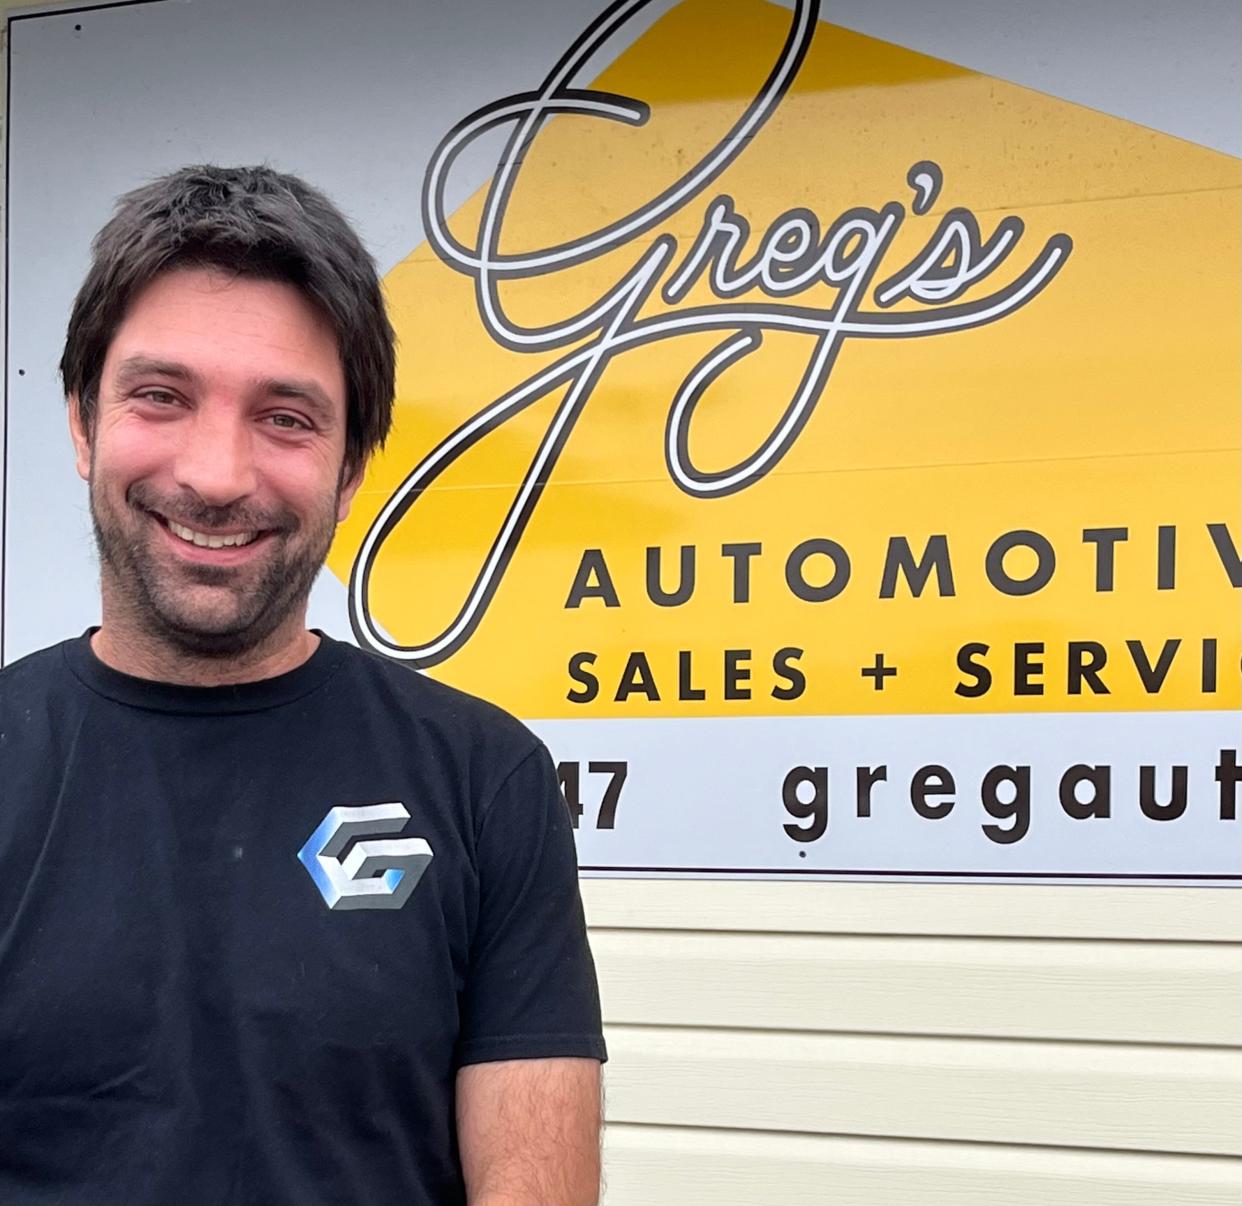 Greg Petkov, owner of The Prized Pig in downtown Mishawaka, also owns Greg's Automotive on the east side of the city.